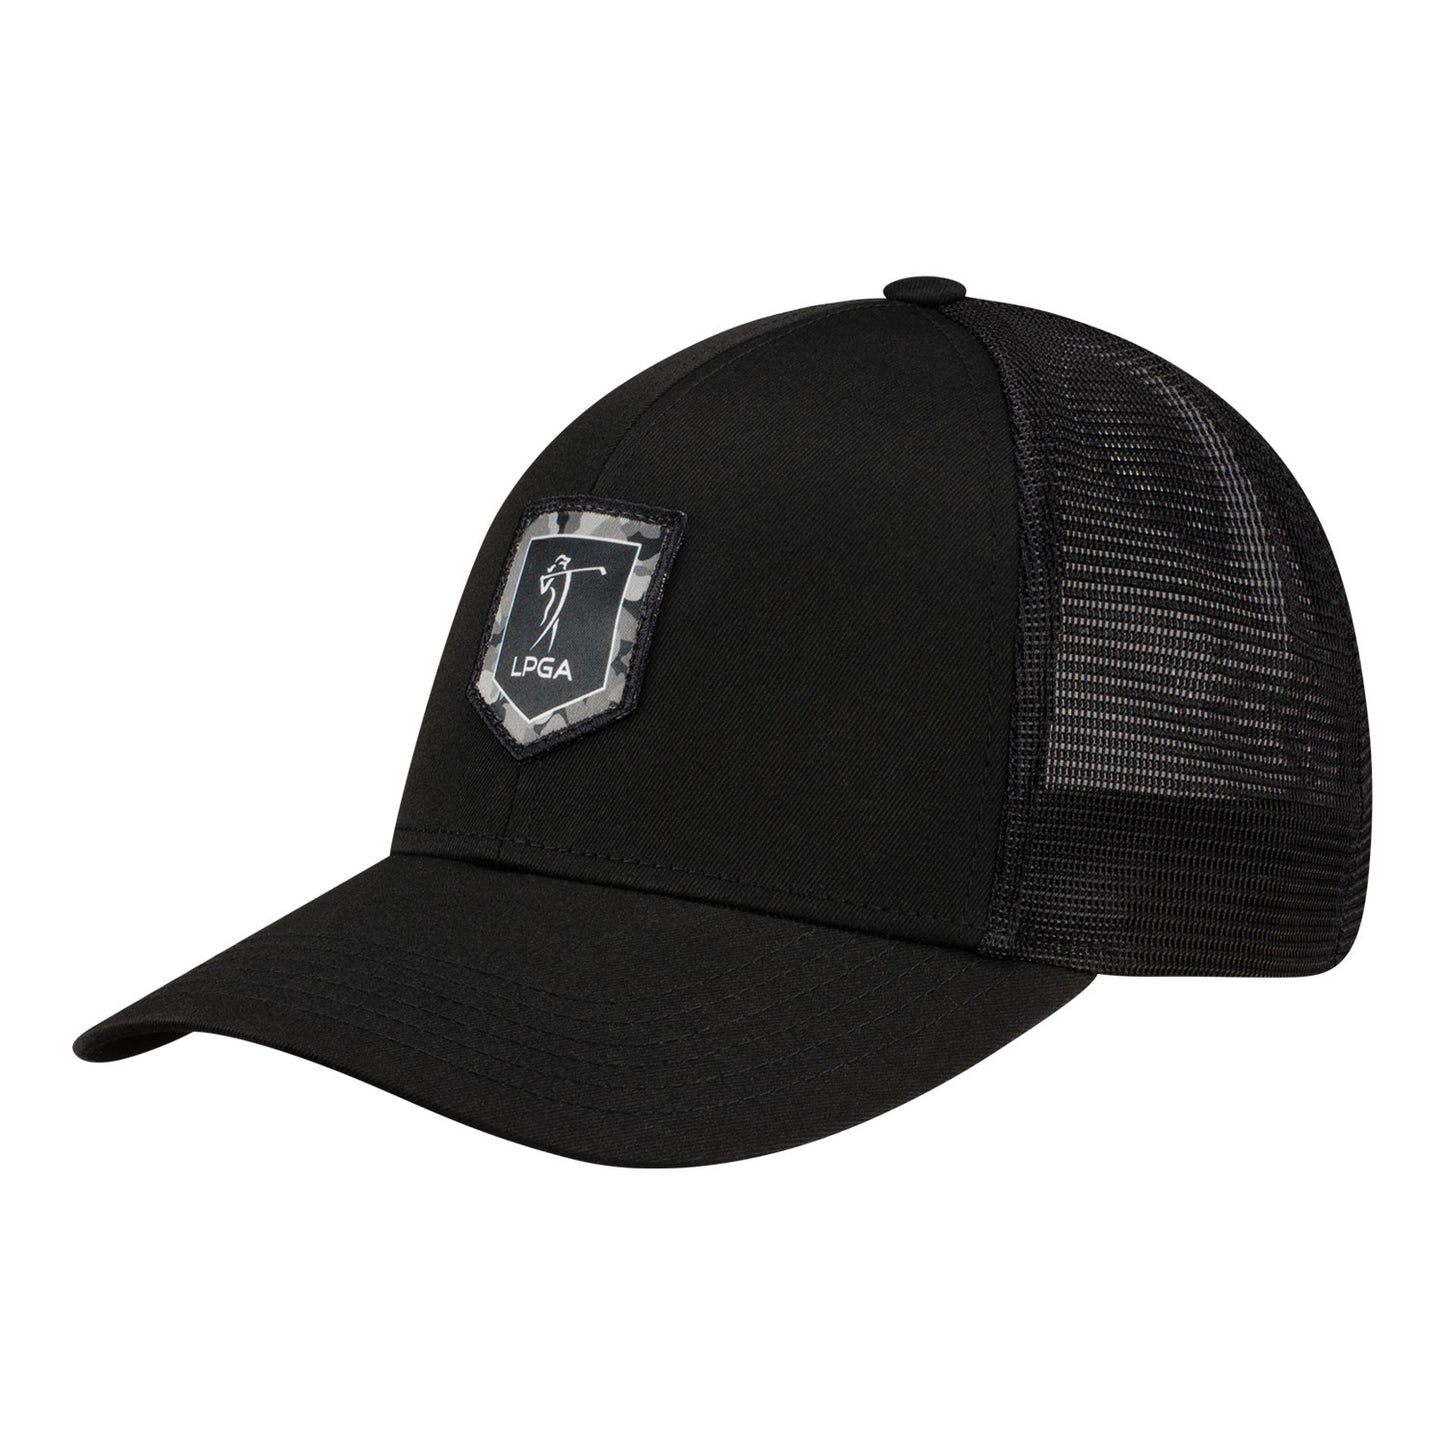 Imperial 2023 LPGA Men's Mesh Back Hat with Satin Edged Patch in Black - Angled Left Side View